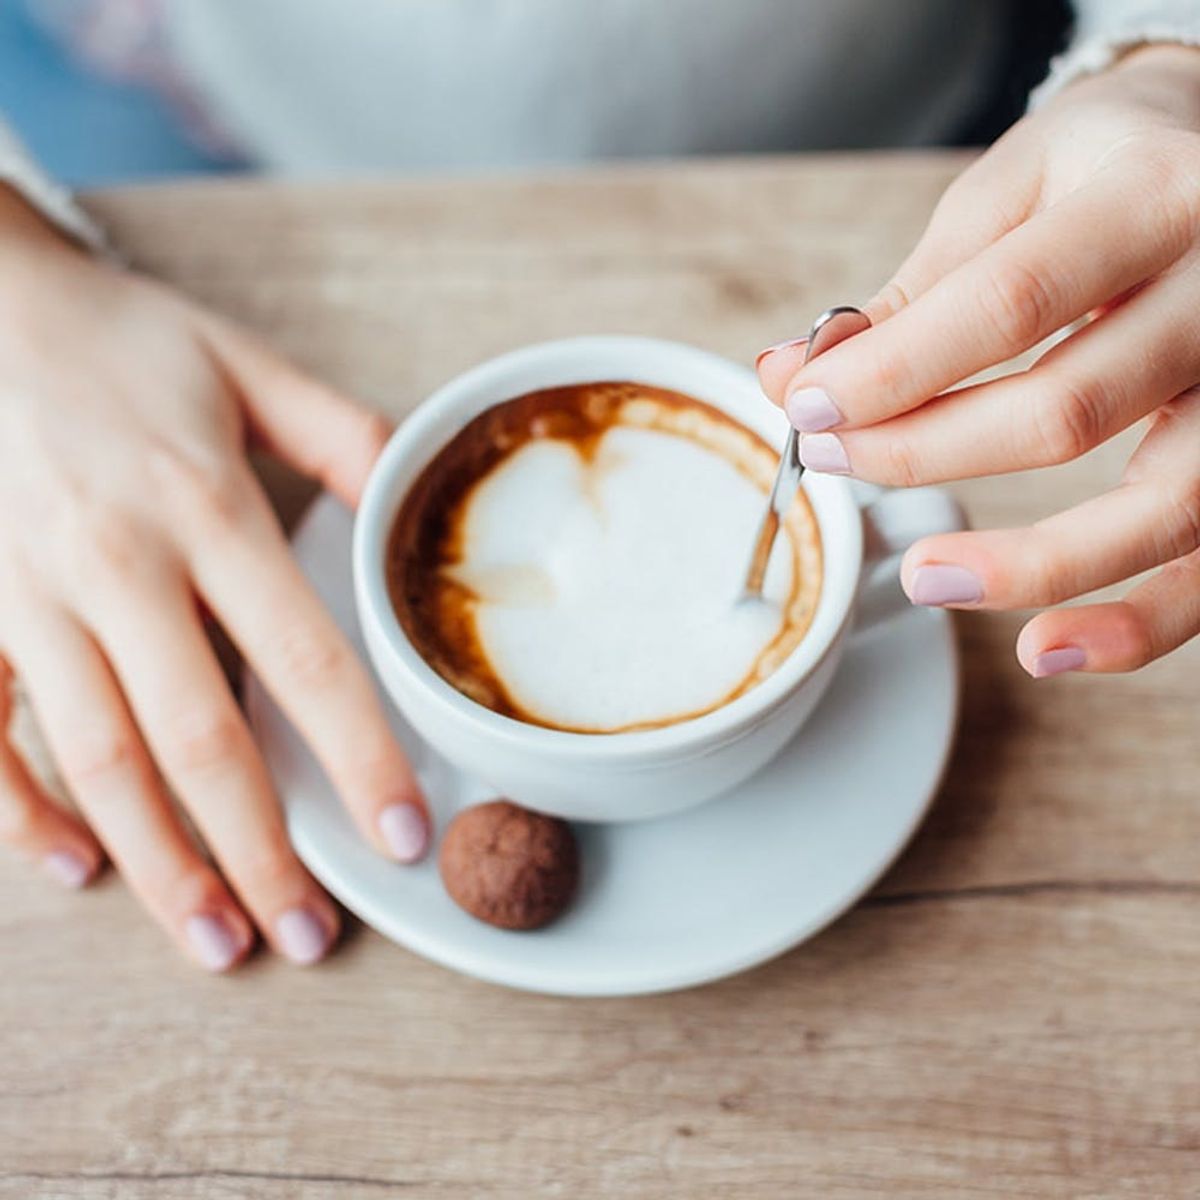 This Age-Old Coffee Hack Was Just Proven True by Science